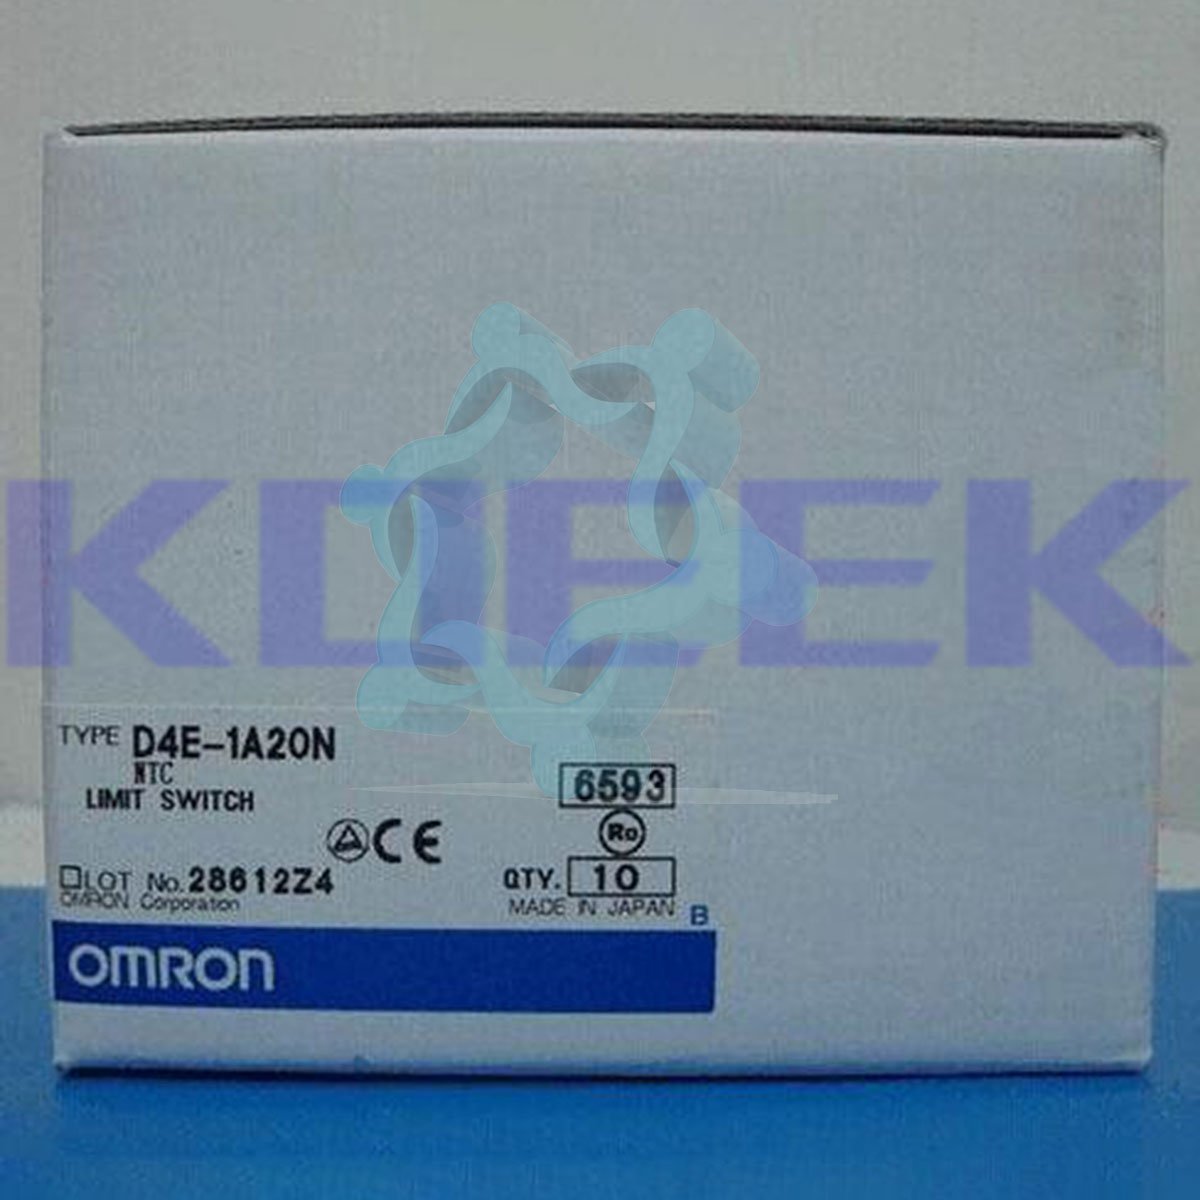 D4E-1A20N KOEED 1, 80%, import_2020_10_10_031751, Omron, Other